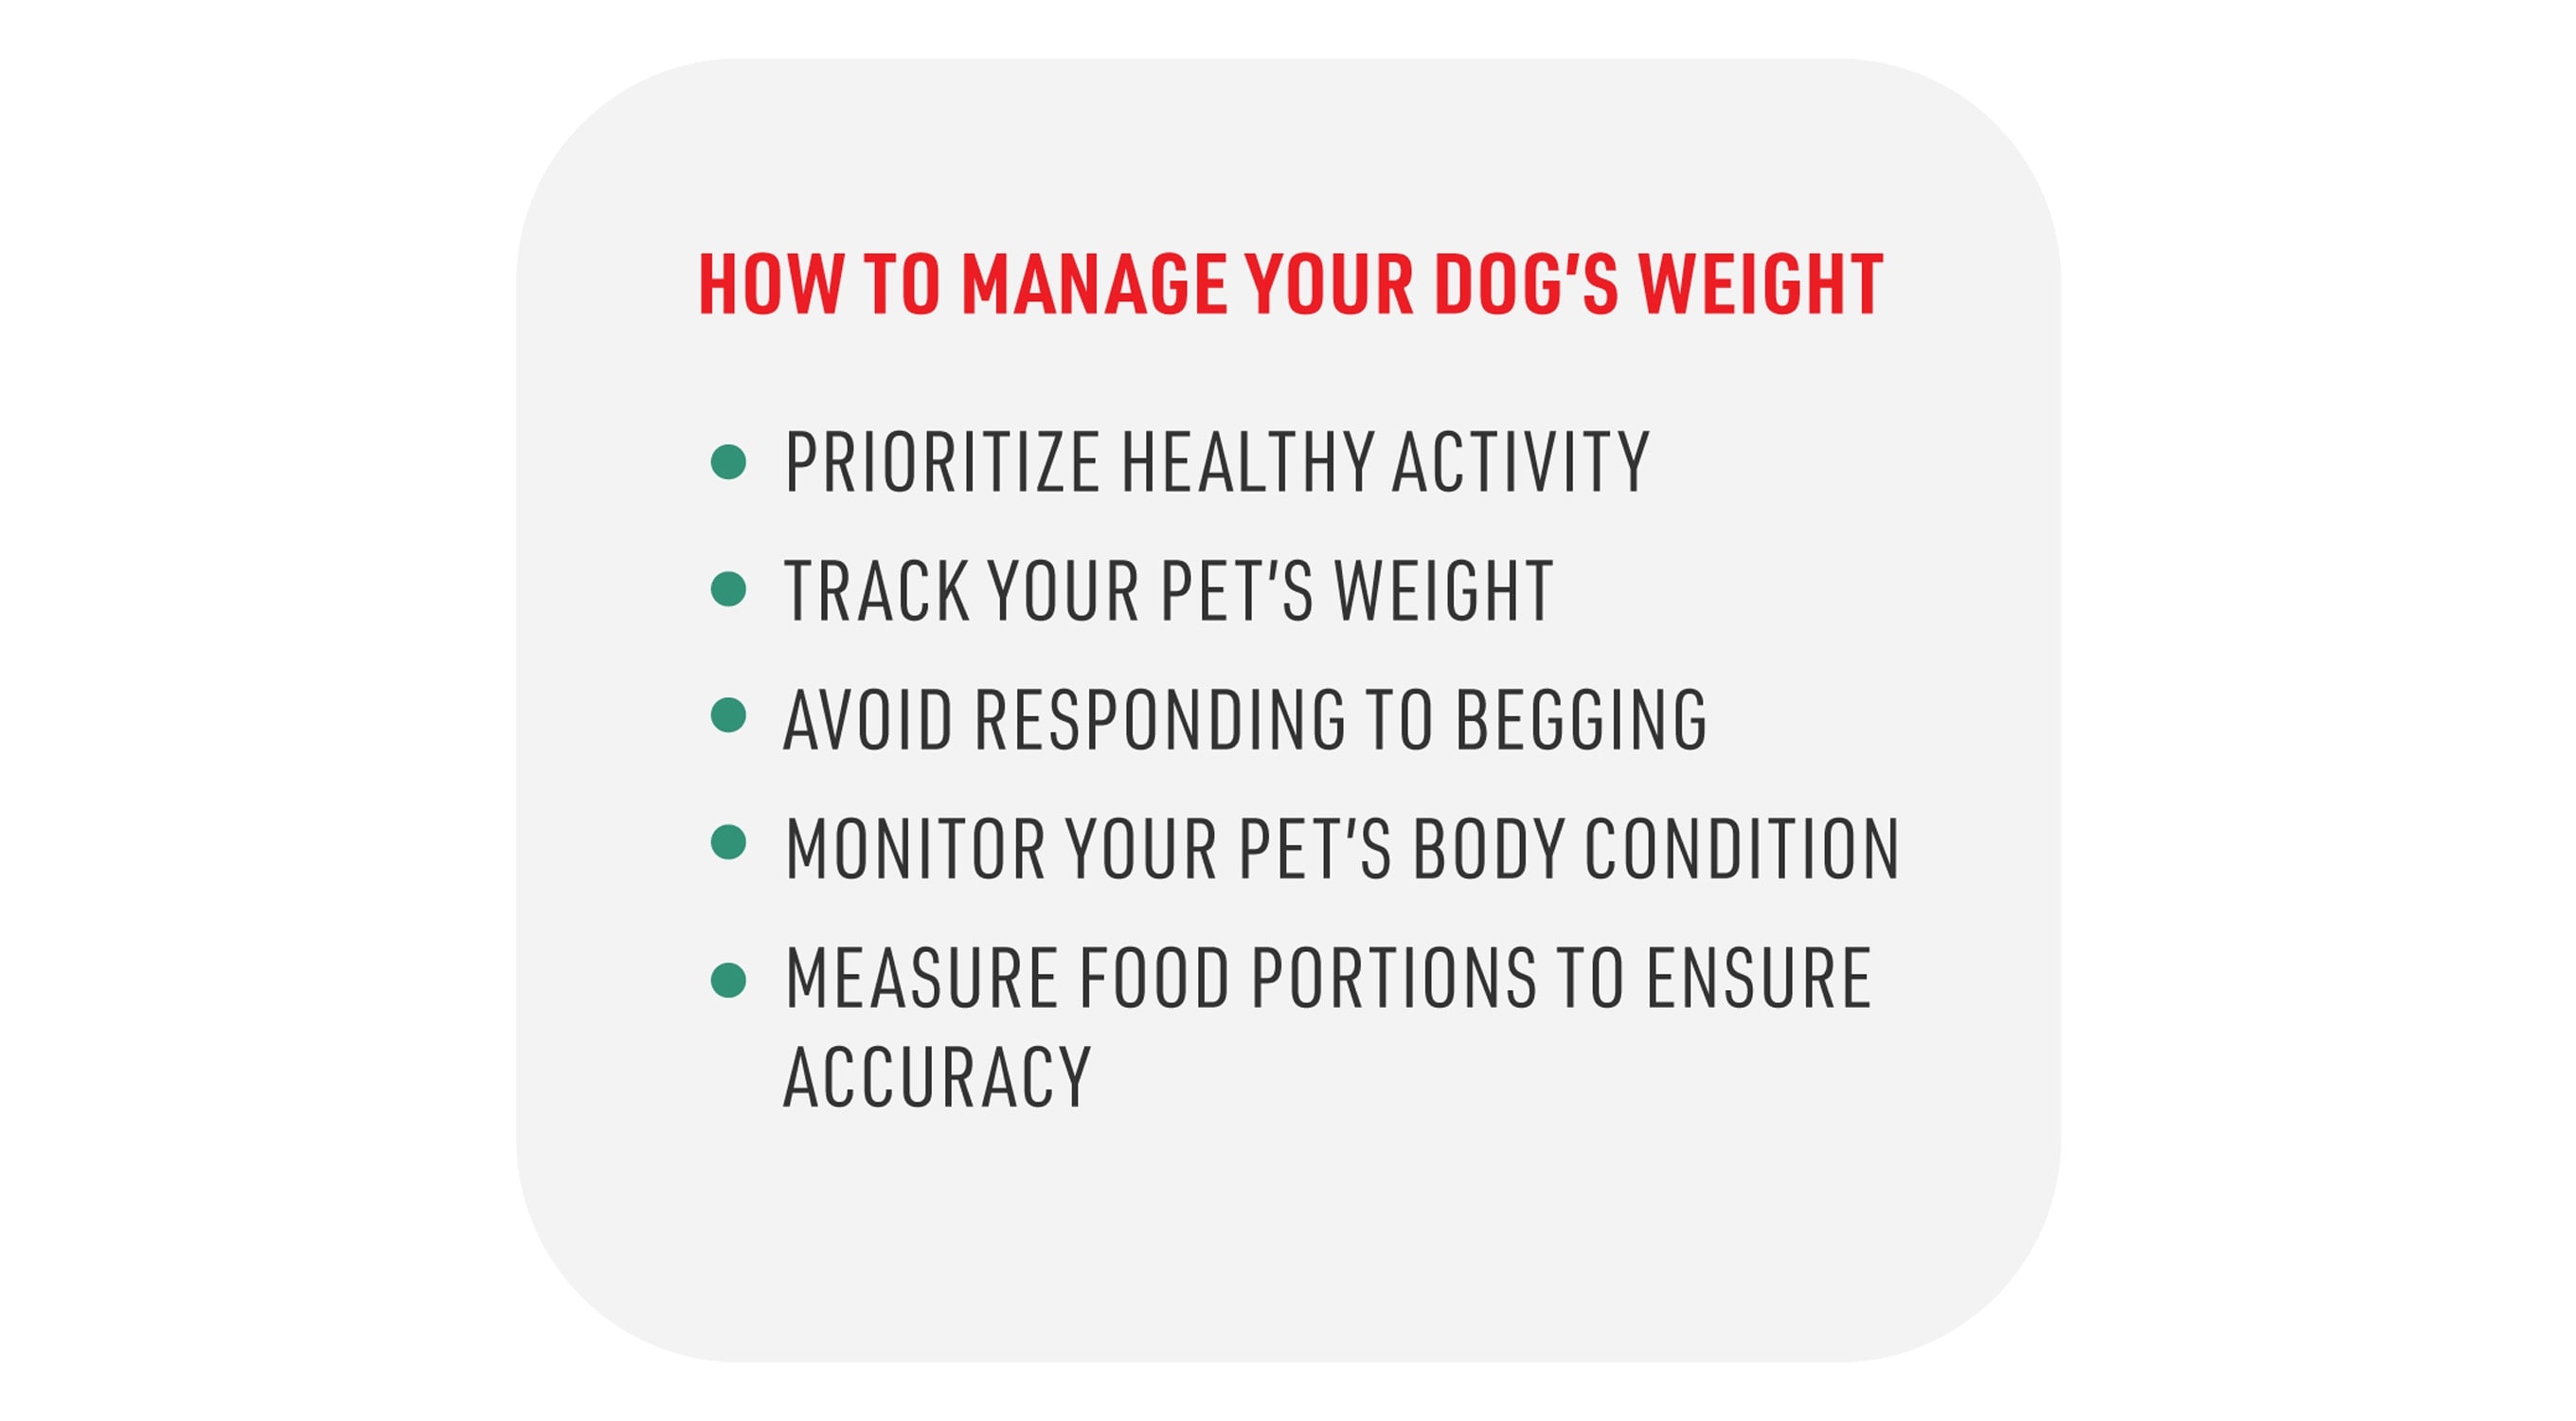 Canine Satiety® Support Weight Management